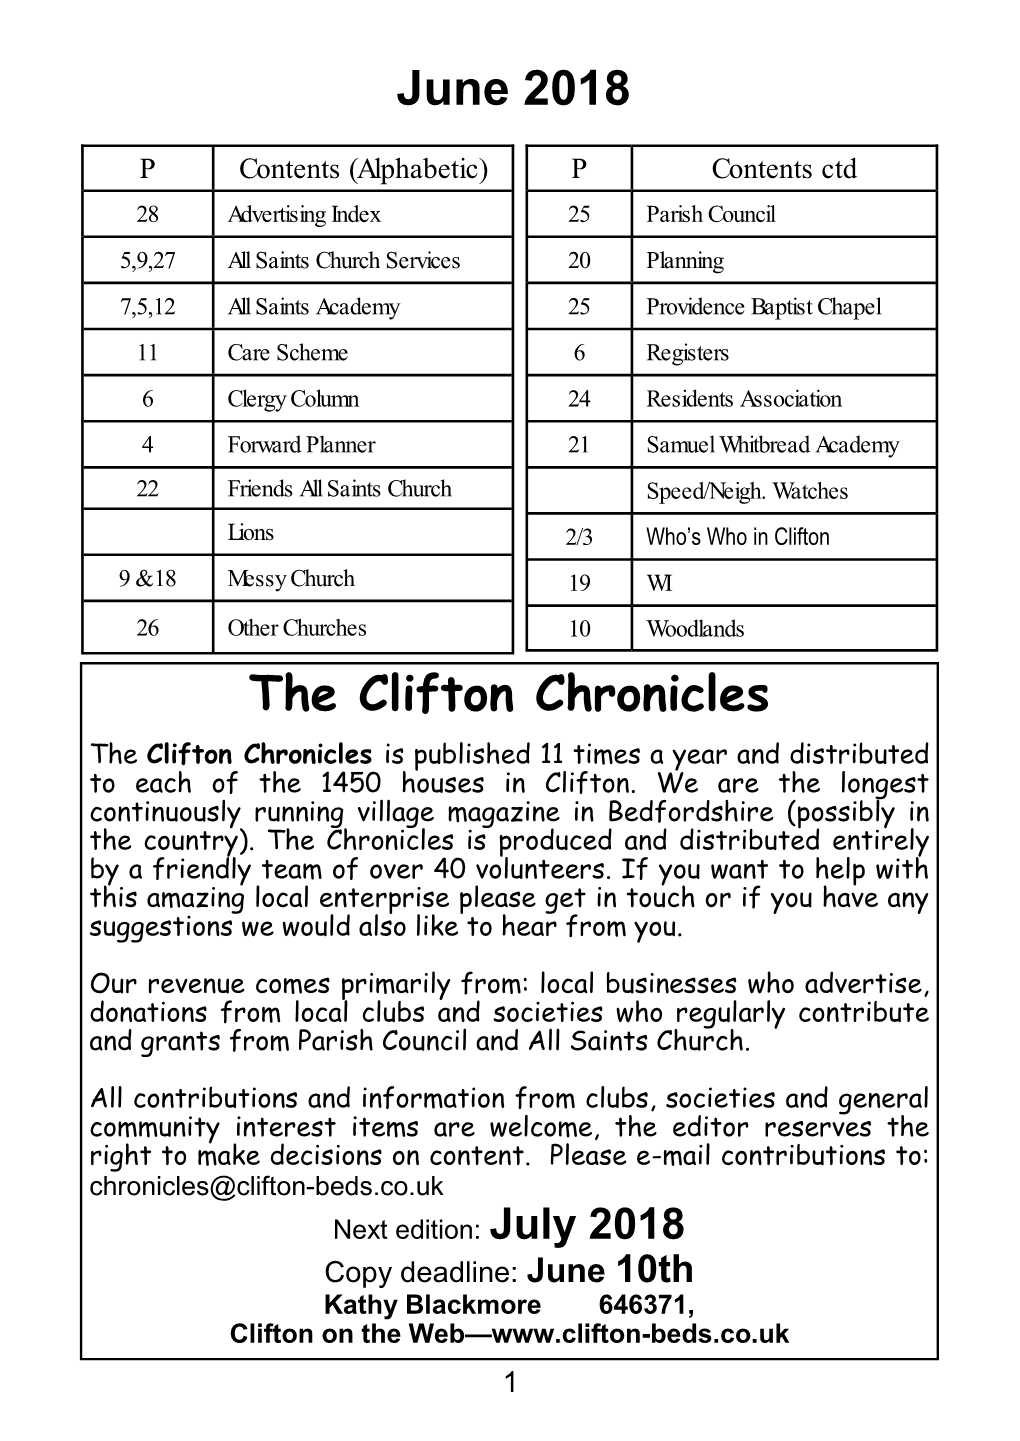 June 2018 the Clifton Chronicles